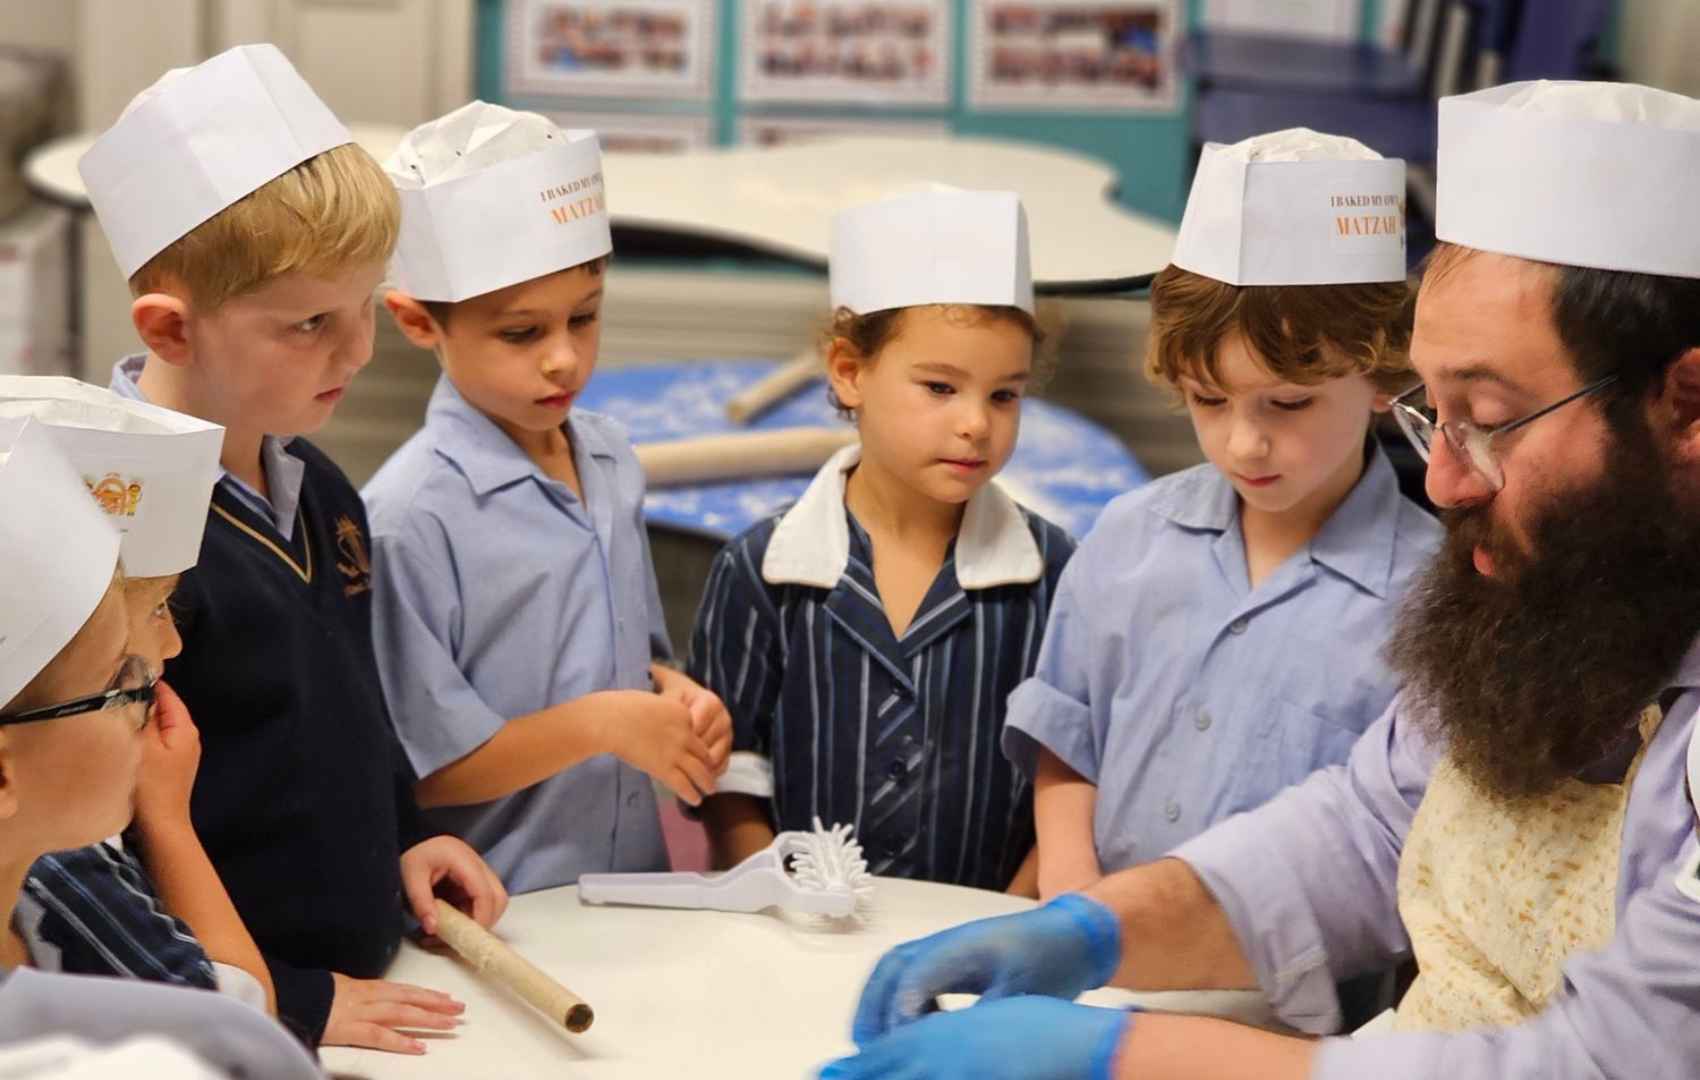 Six Prep students join Rabbi Yossi making matzah for Pesach. They are wearing white chefs hats with their school uniform.